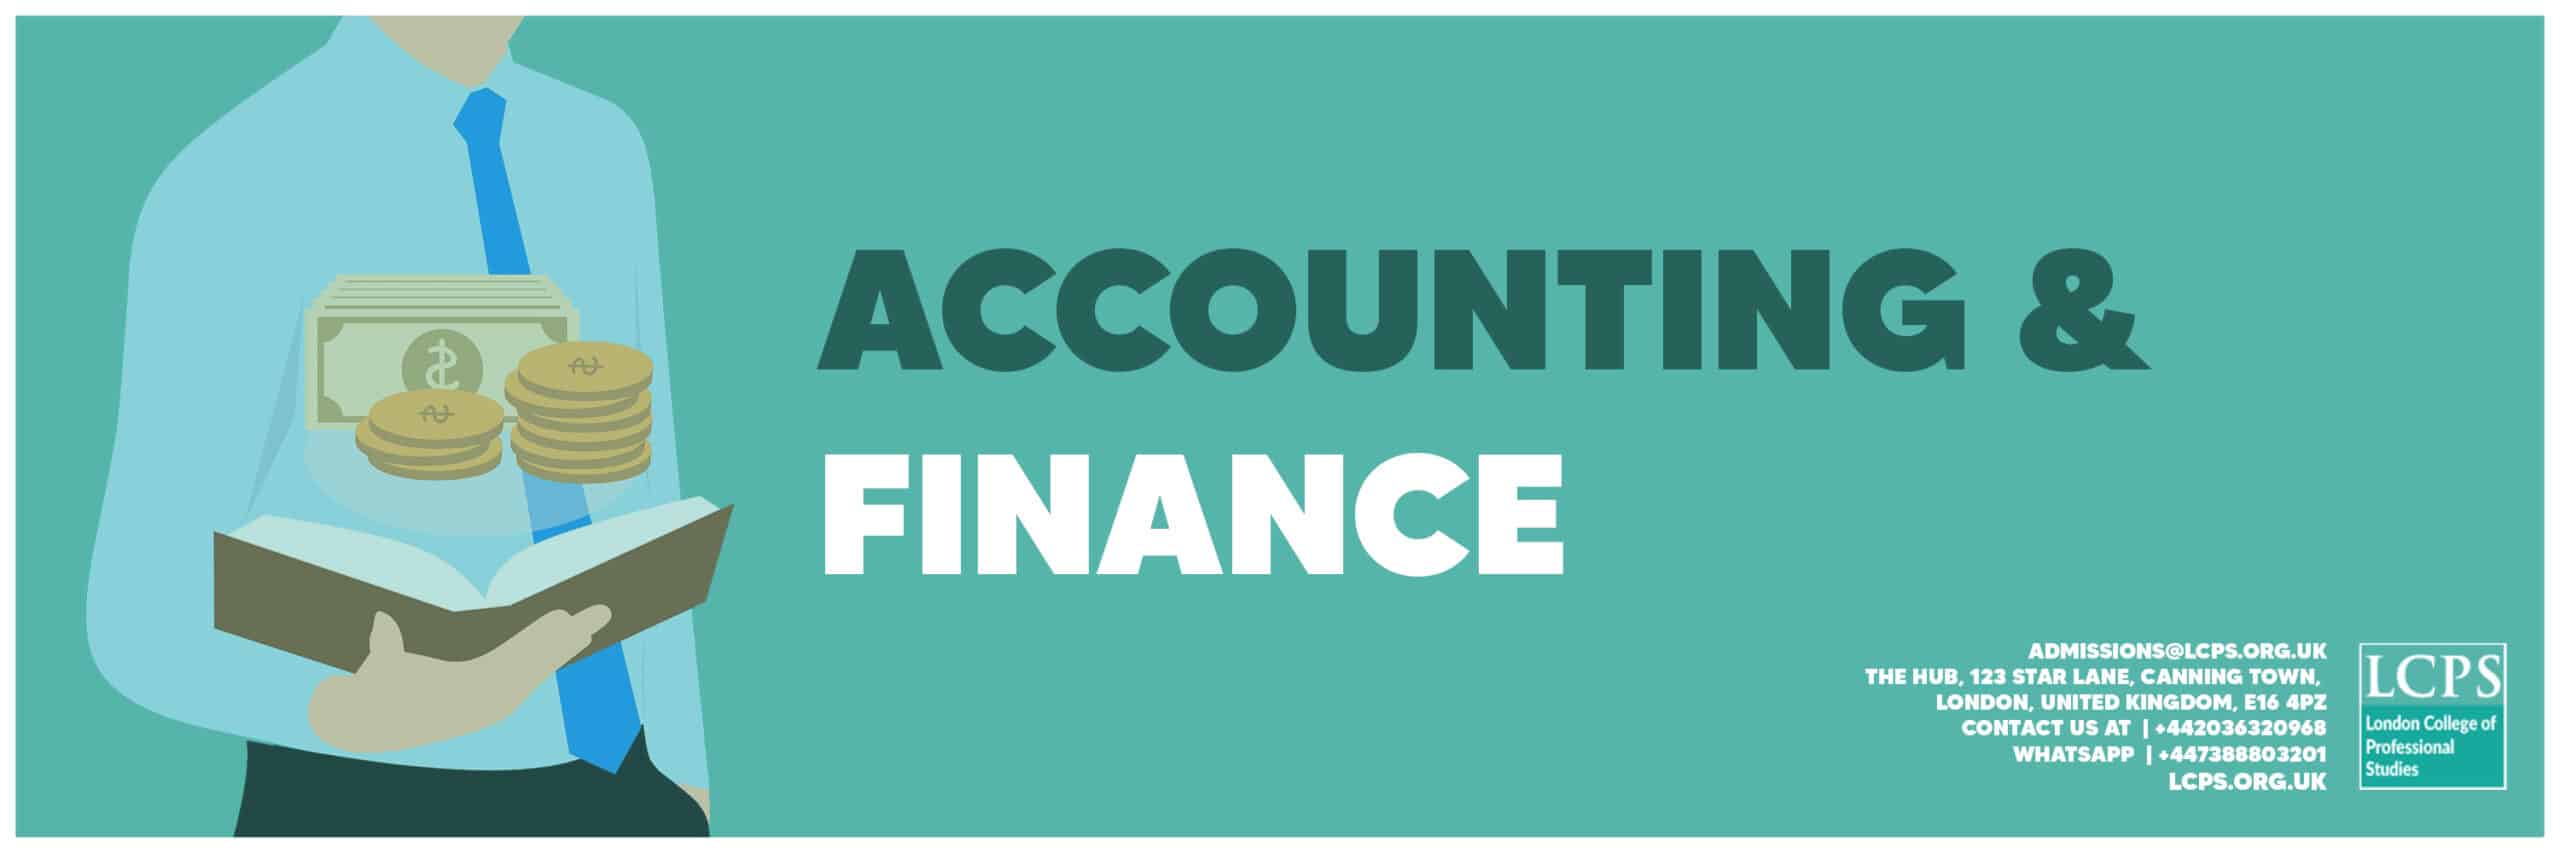 ACCOUNTING AND FINANCE